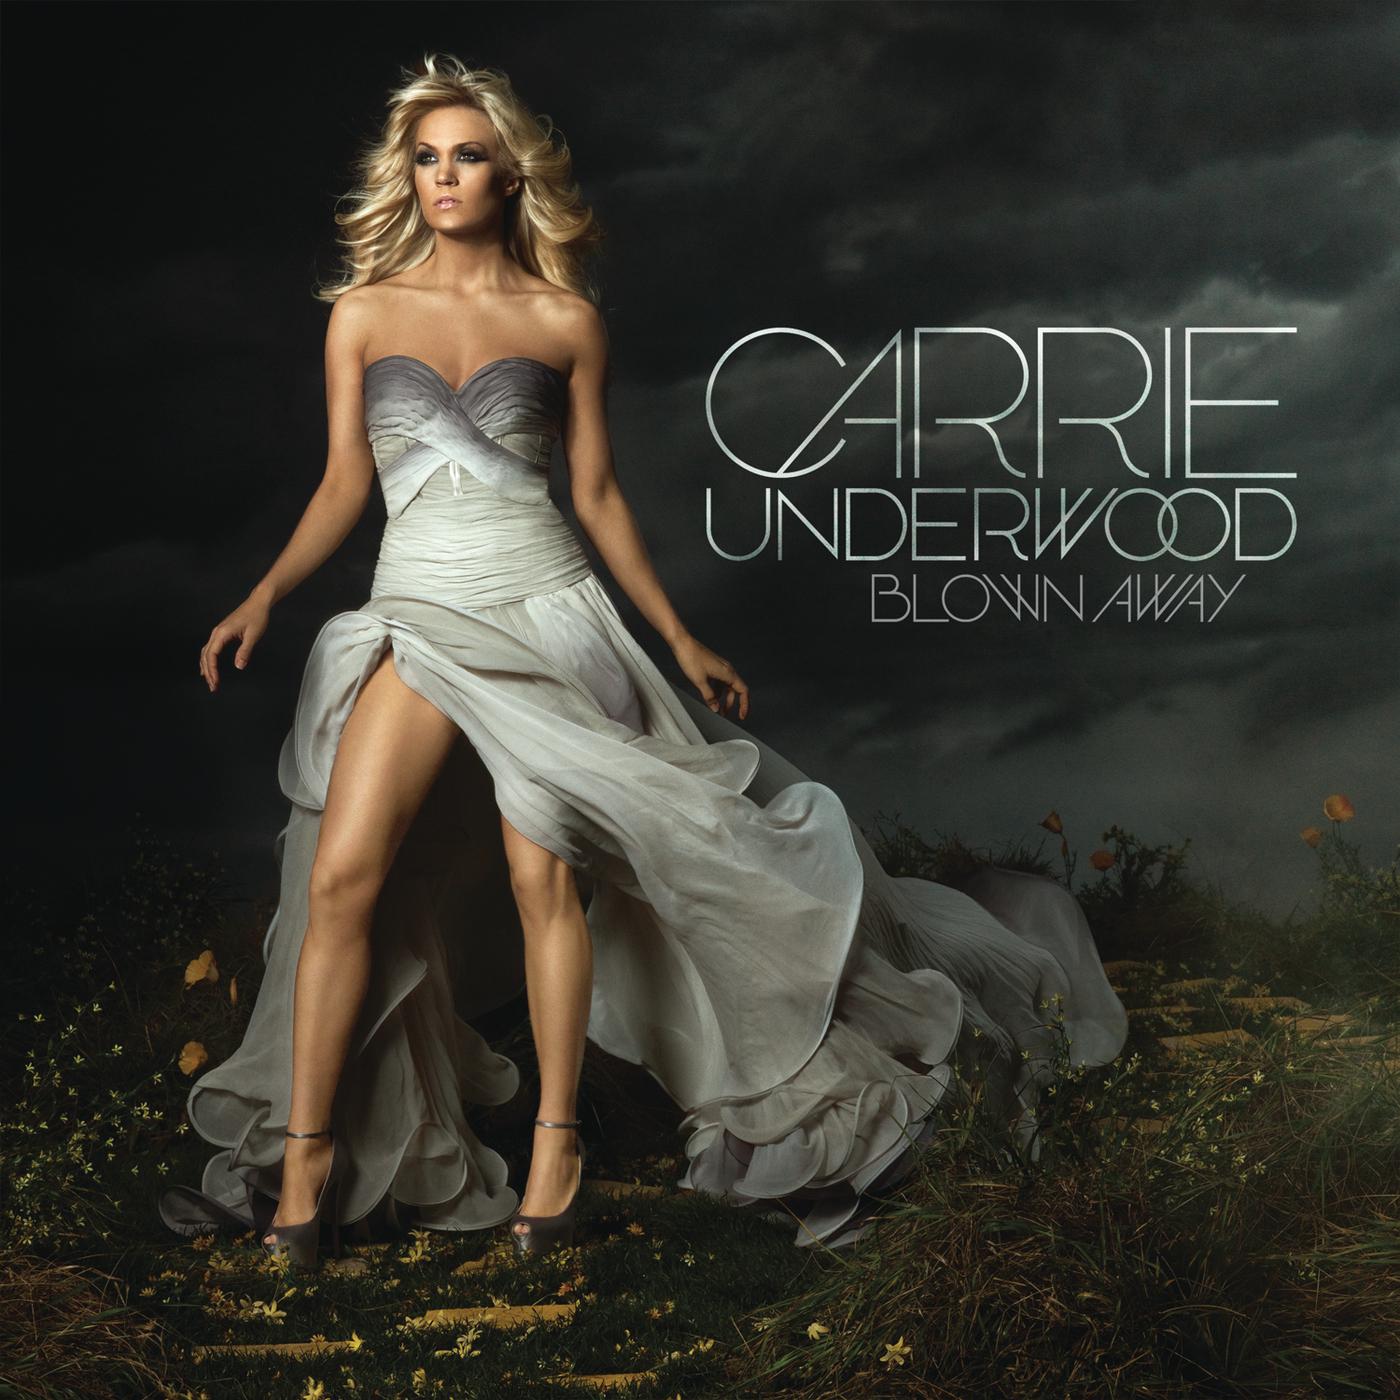 Carrie Underwood - Who Are You